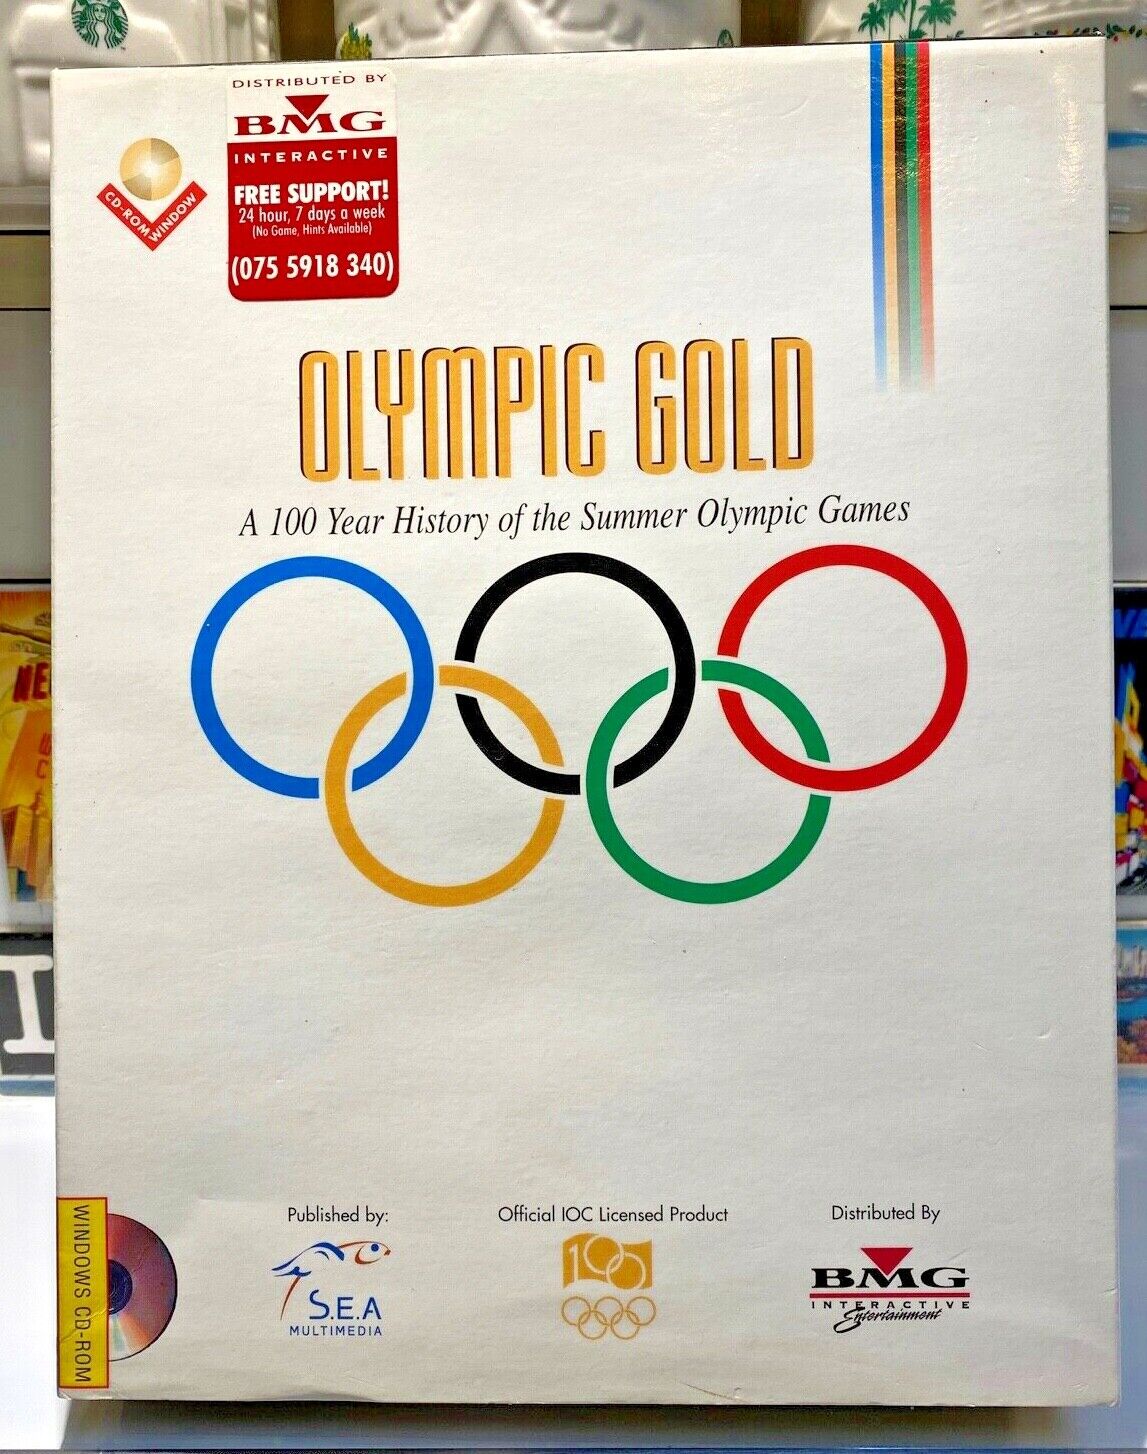 Olympic Gold A 100 Year History of the Summer Games CD-Rom Vintage PC Game 1995